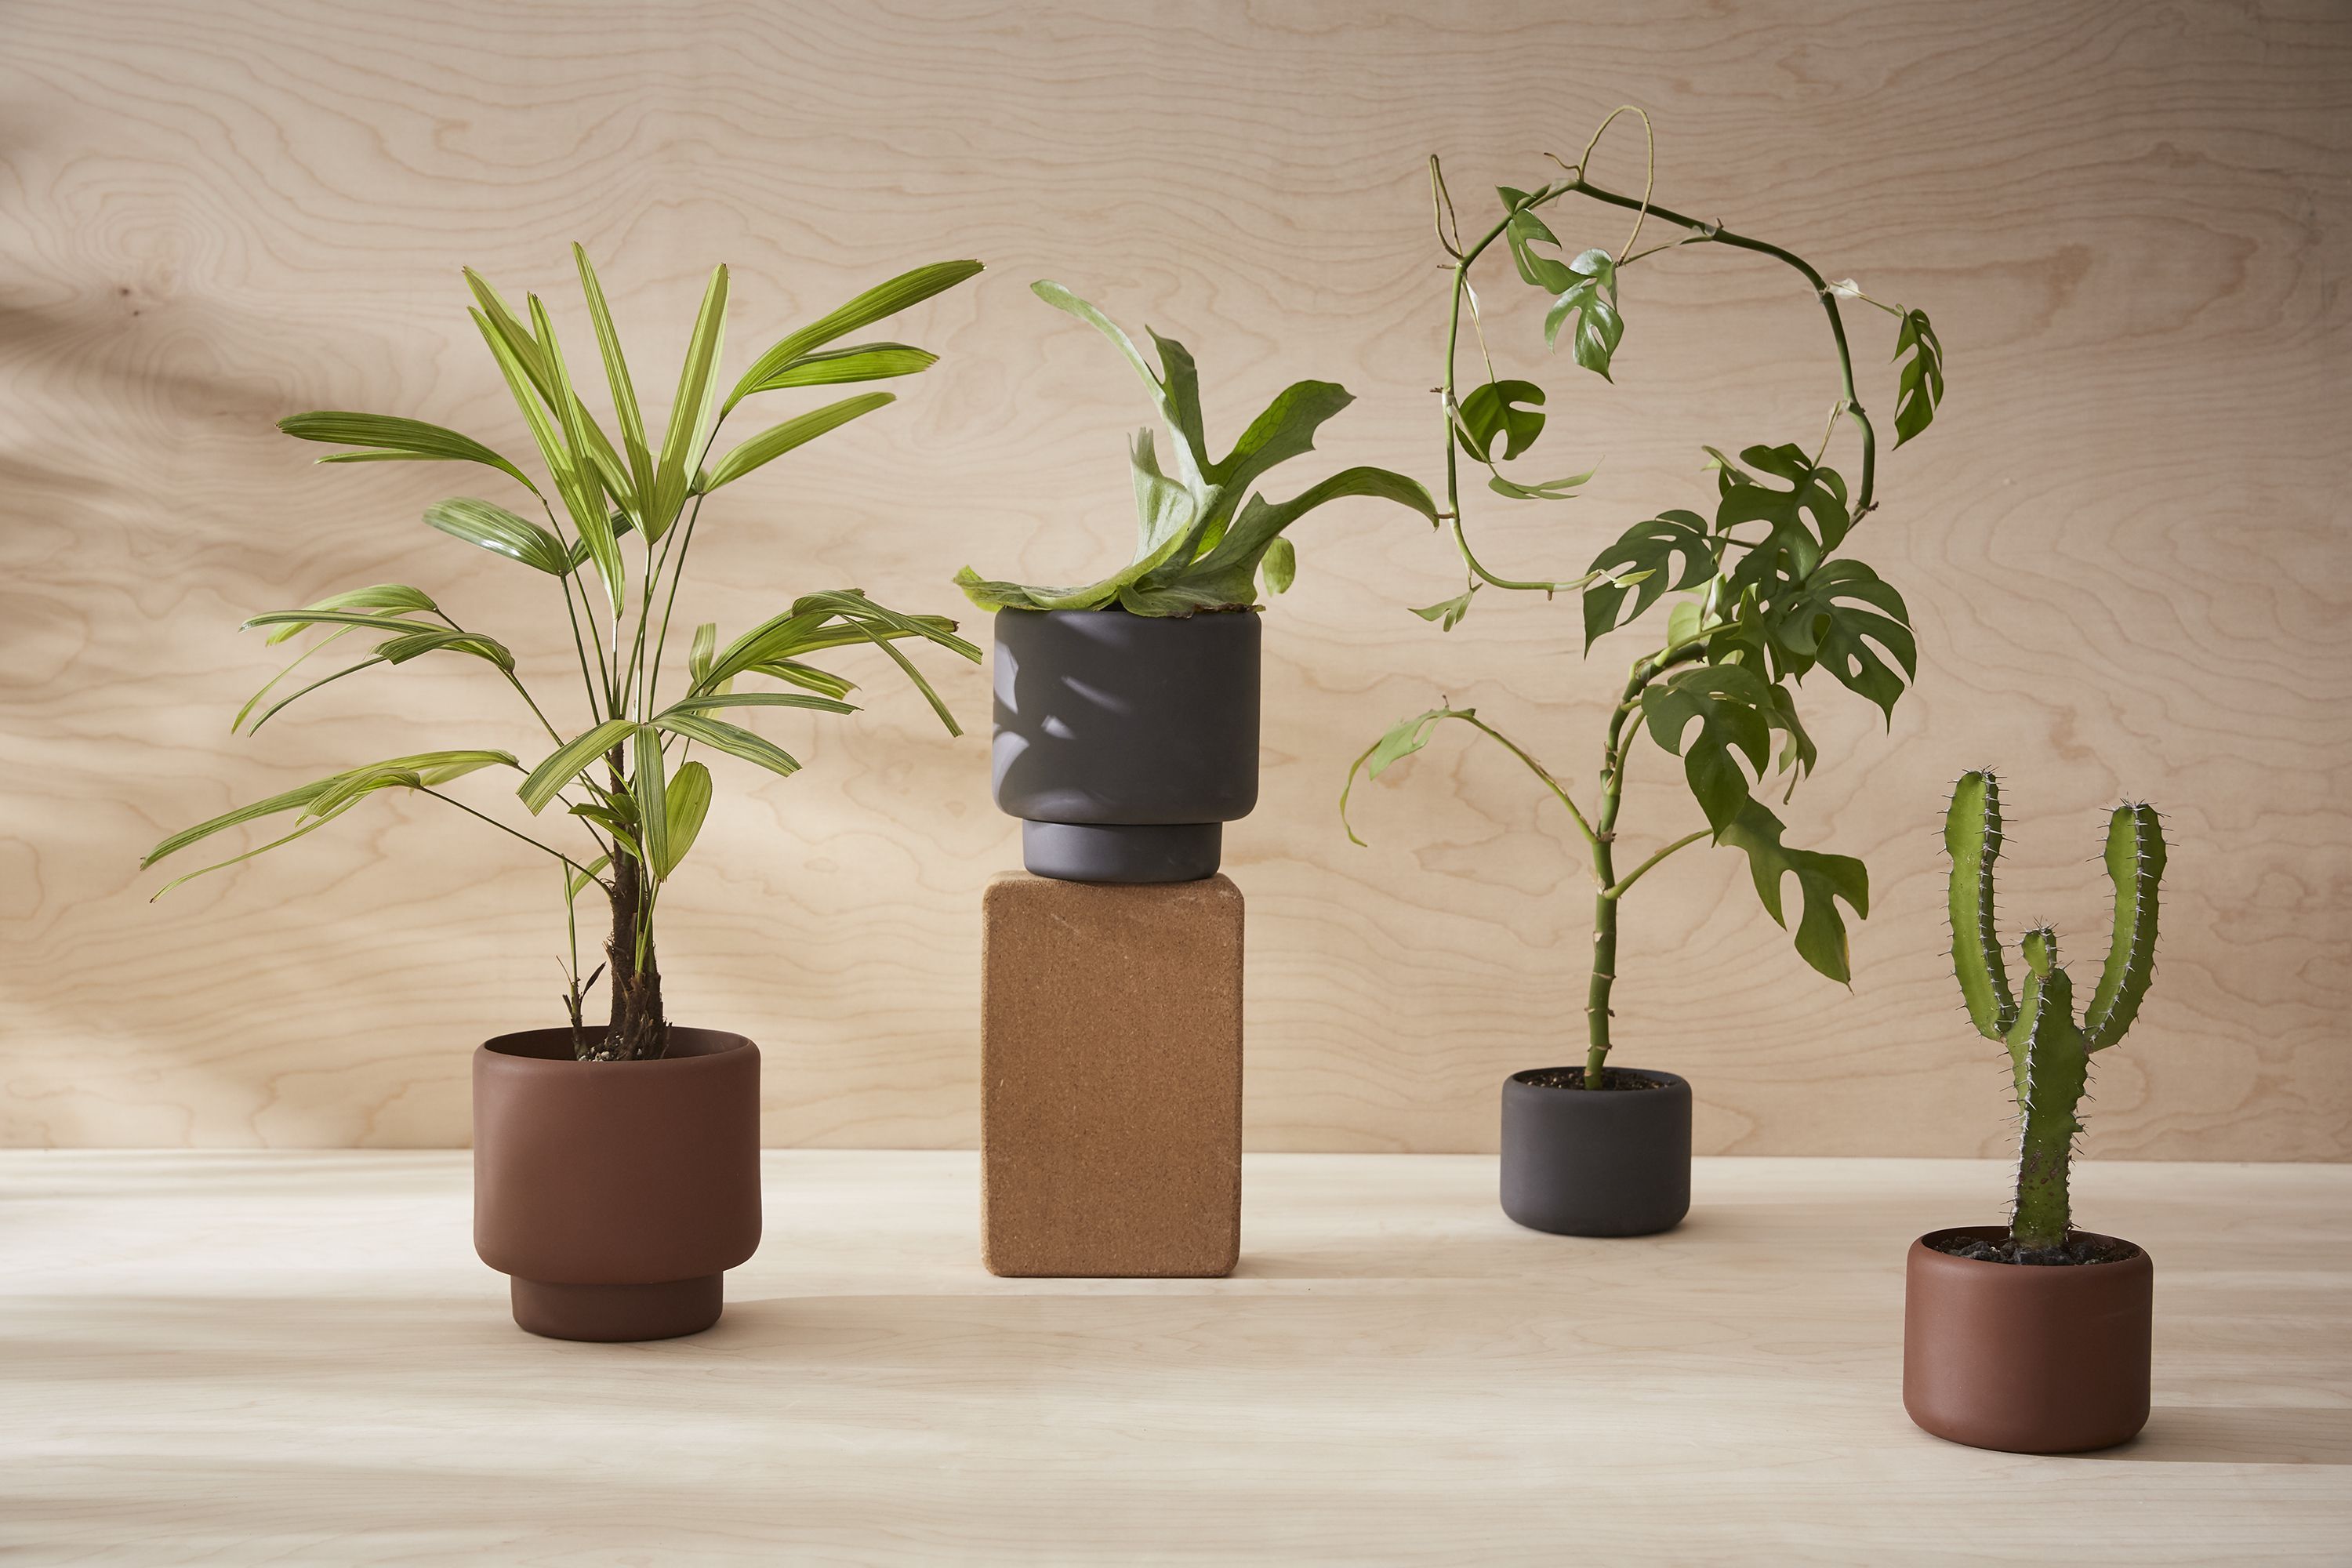 21 of the best modern planters for outdoors and indoors